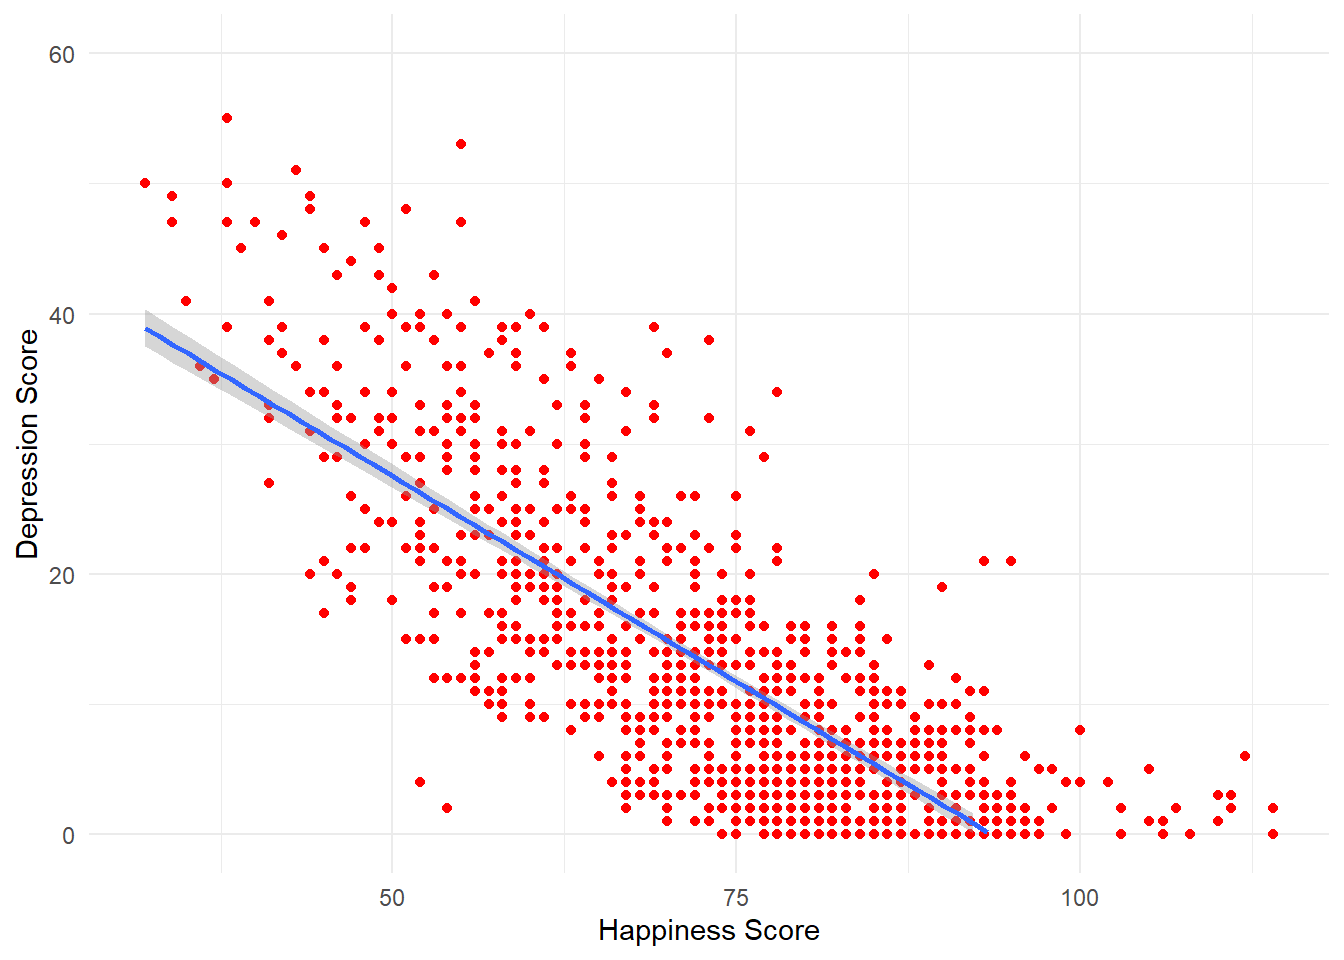 Scatterplot of happiness and depression scores